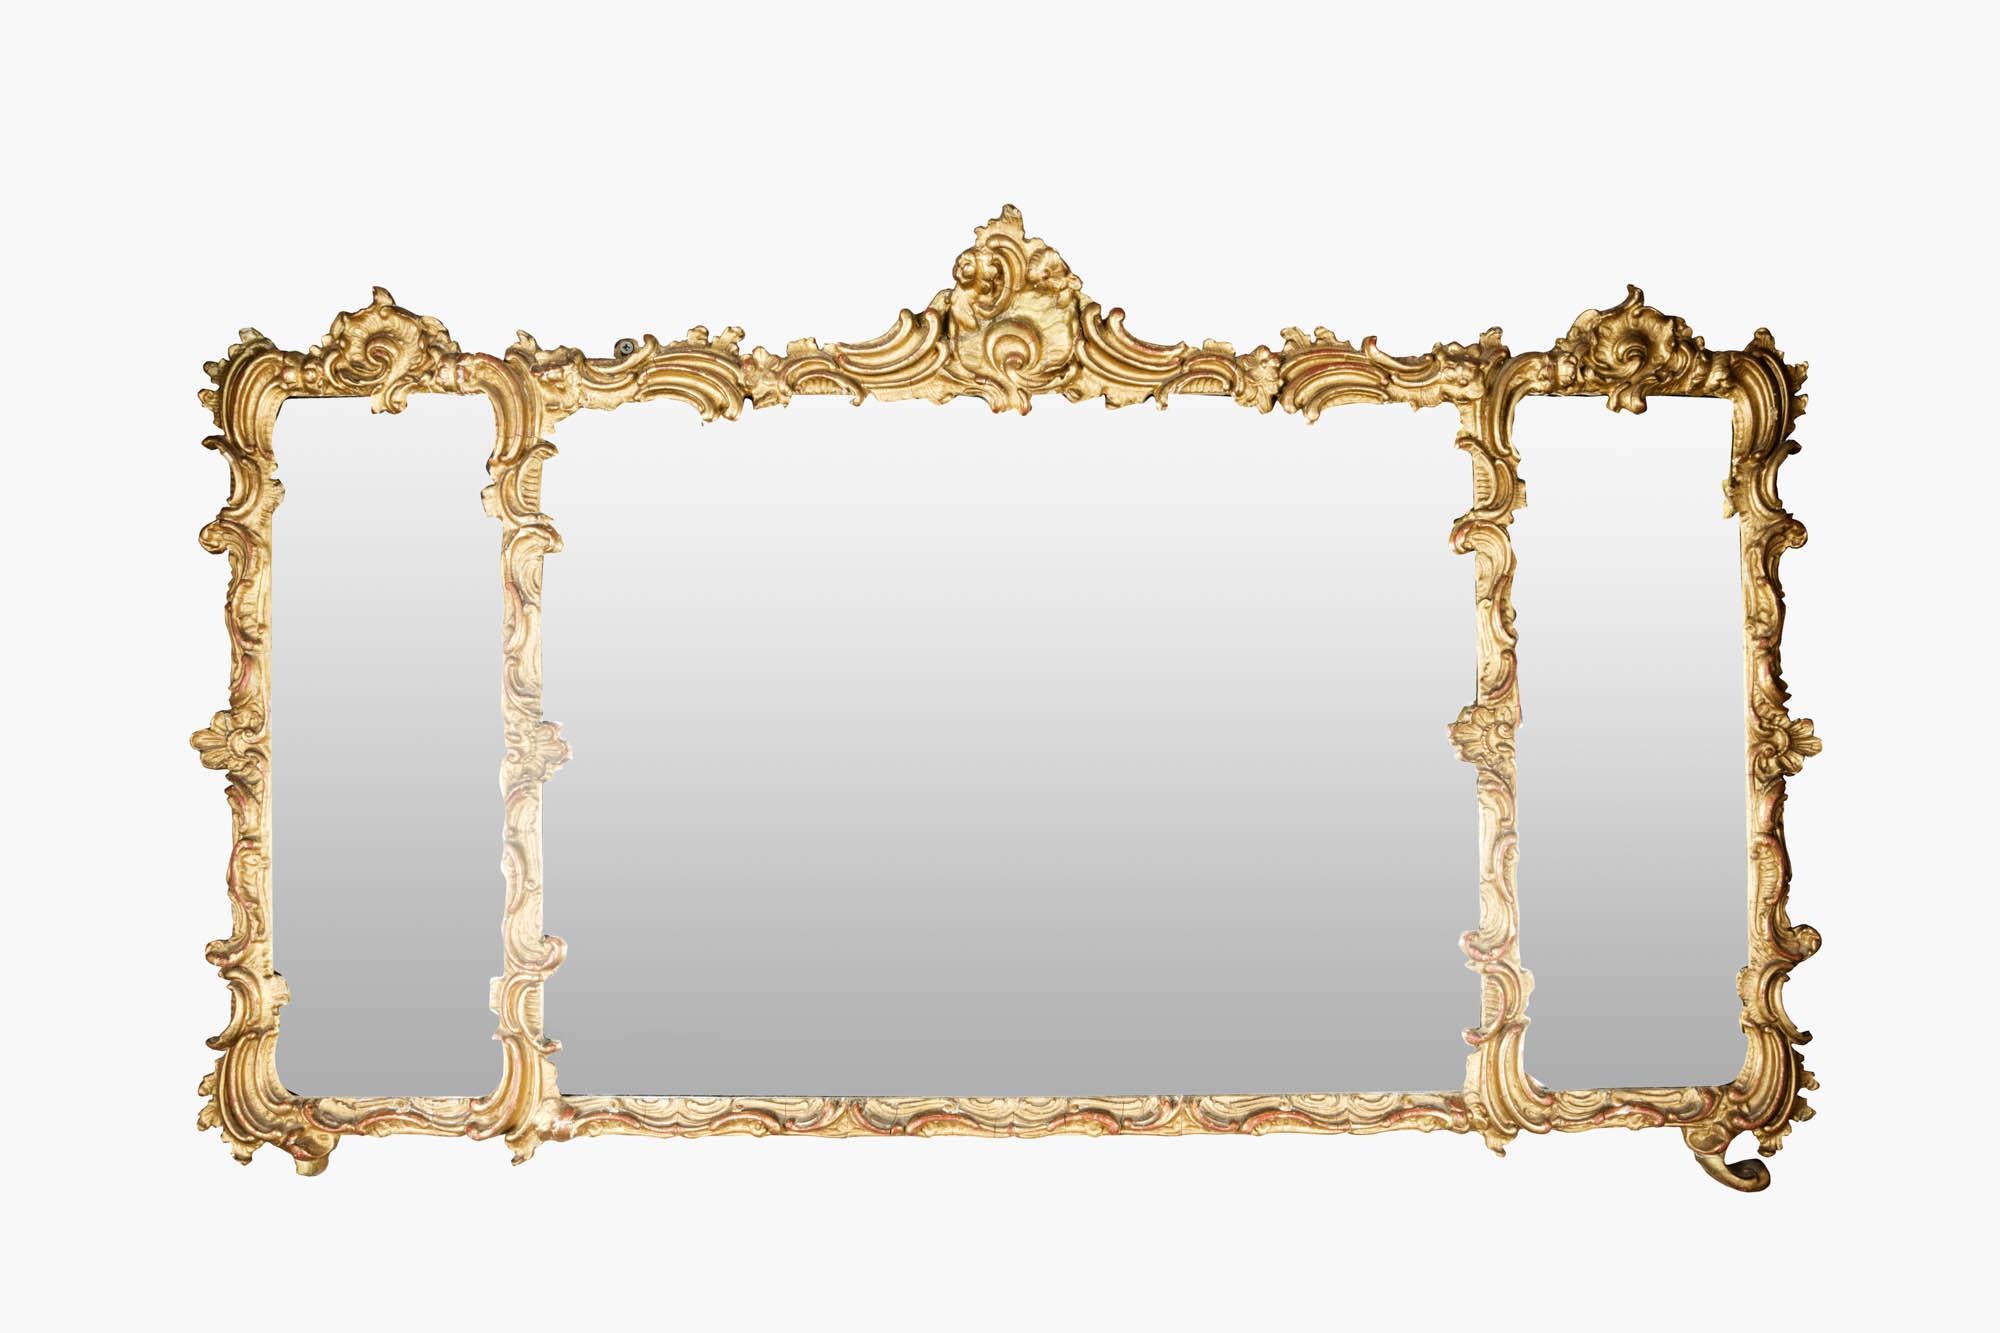 19th century Ornately decorated Regency gilt overmantel mirror with three glass panels. The intricately detailed frame with floral embellishments, and rococo-style flourishes, includes elegant acanthus leaf motifs, shells, and sweeping C-scrolls.